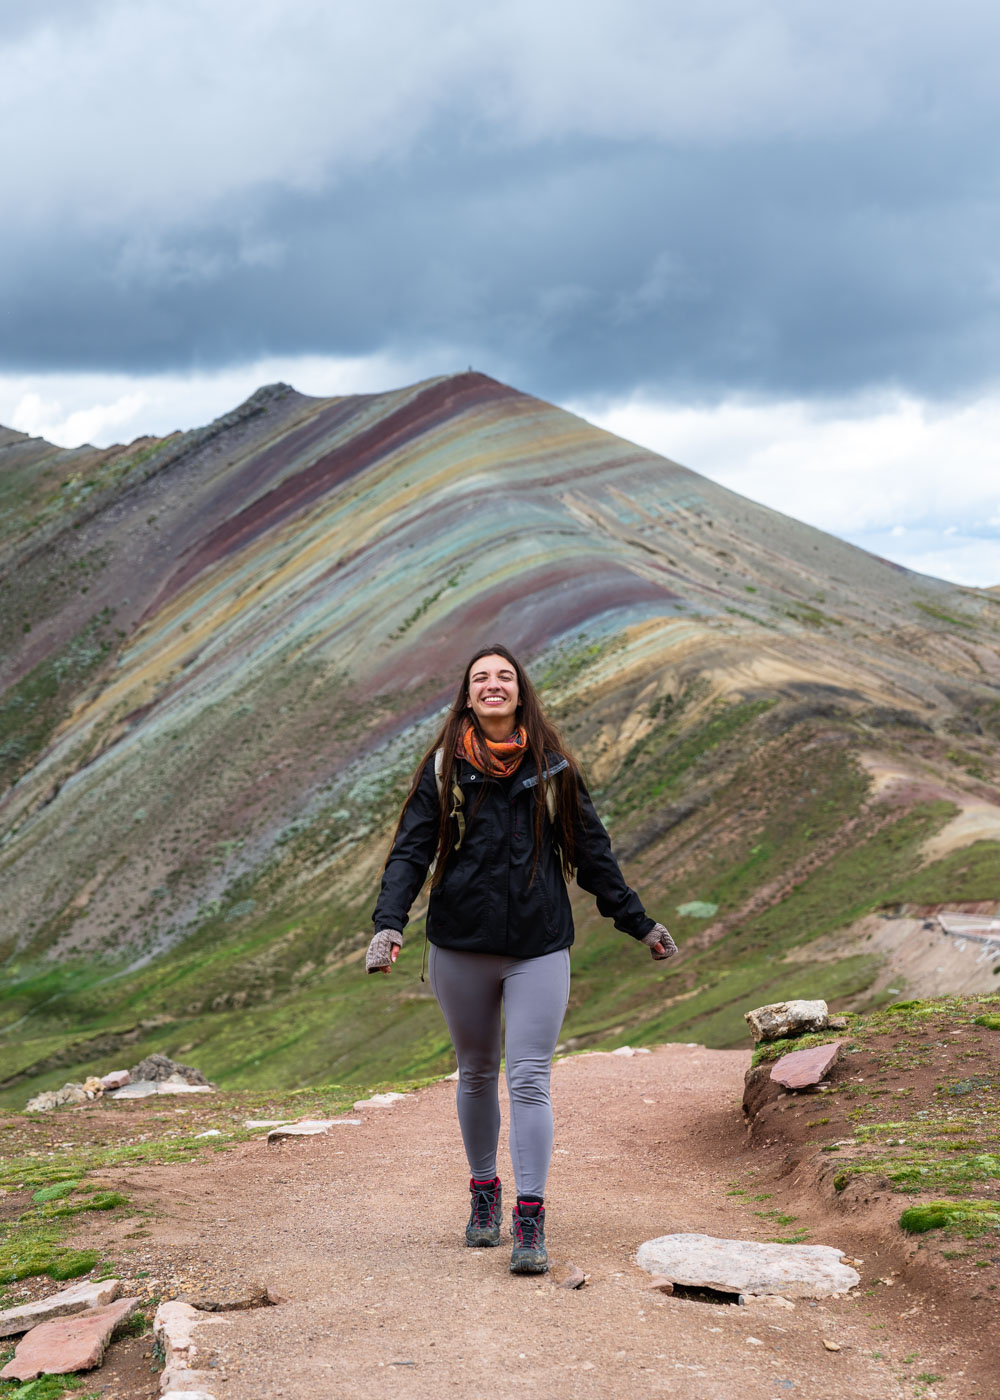 Sara in hiking gear smiling and posing in front of Palcoyo rainbow mountain in Peru with an overcast sky.